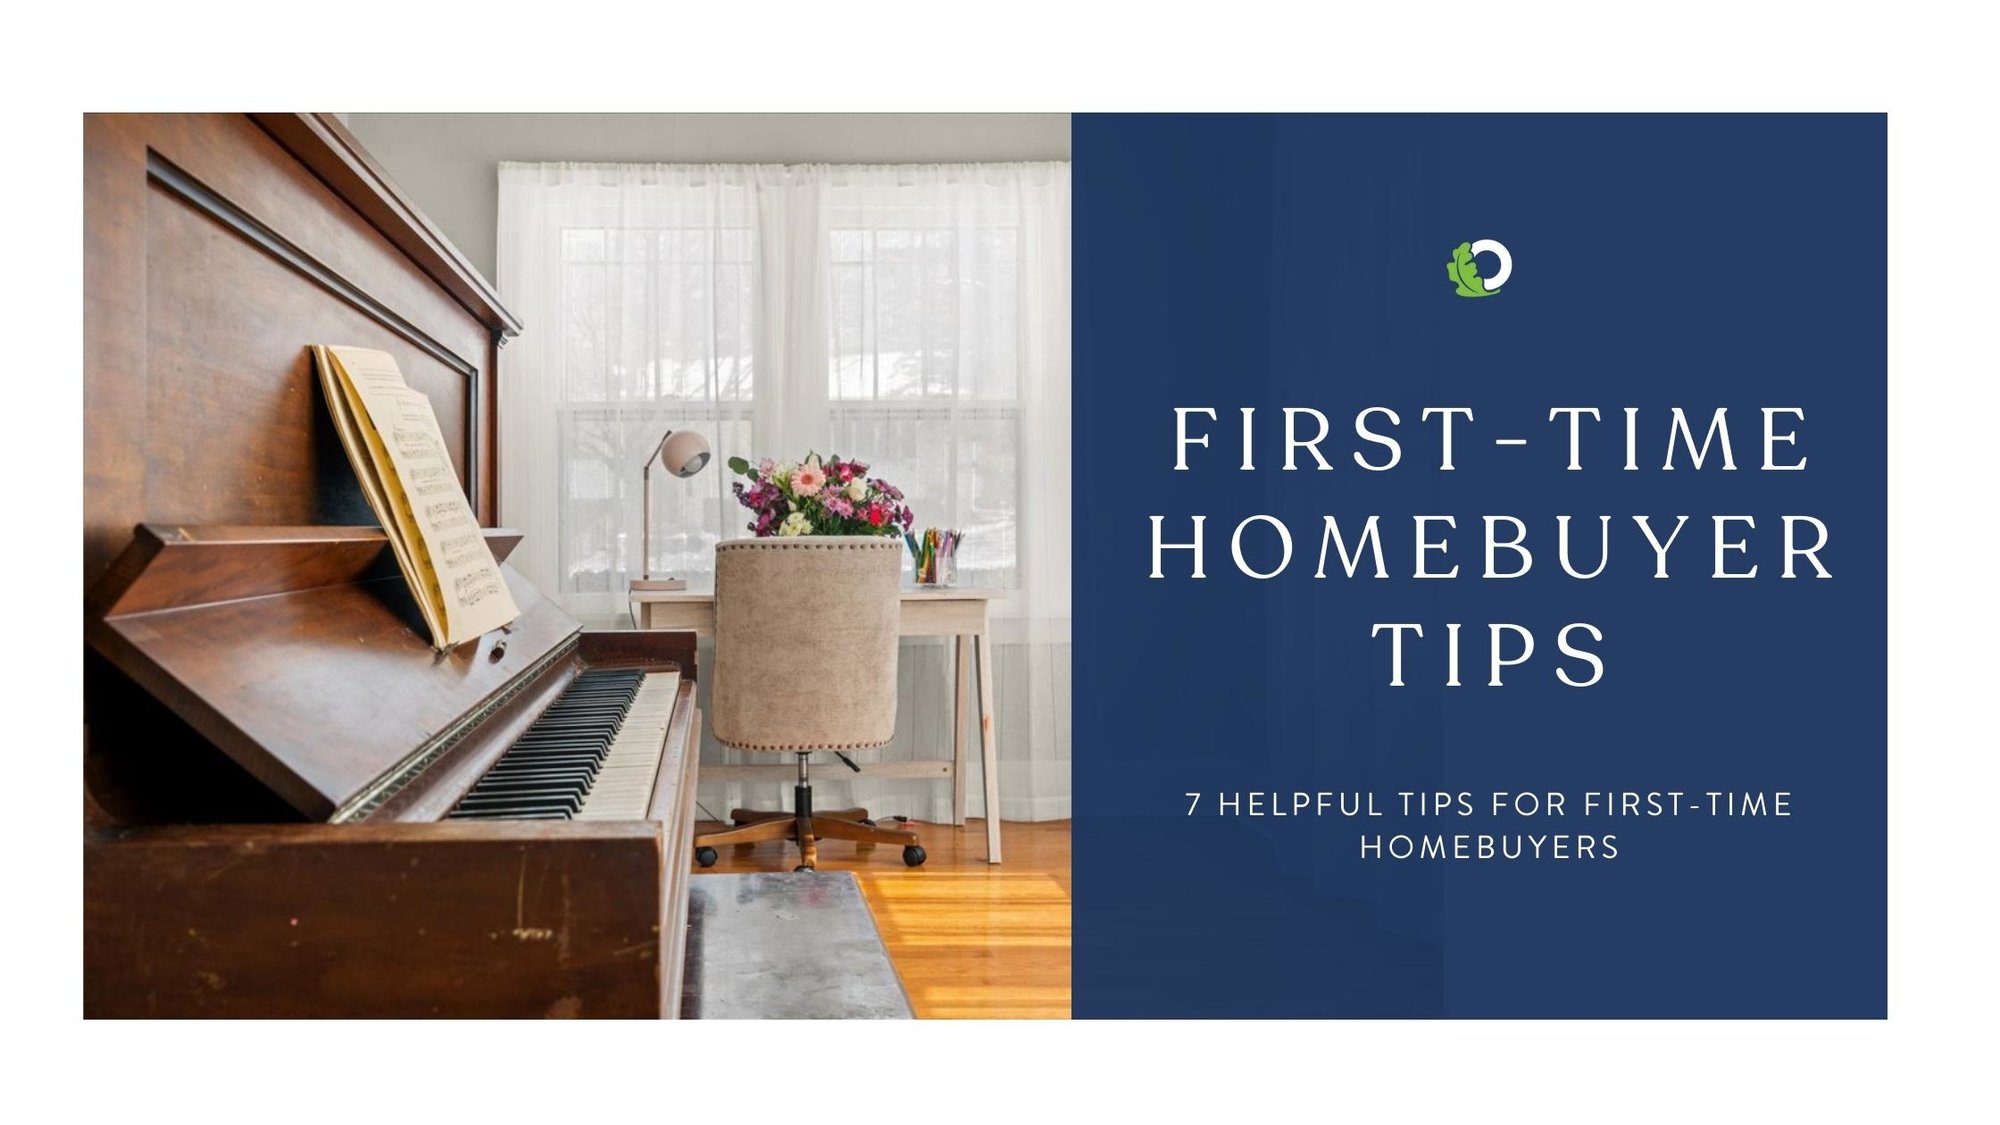 5 Common First-Time Homebuyer Mistakes